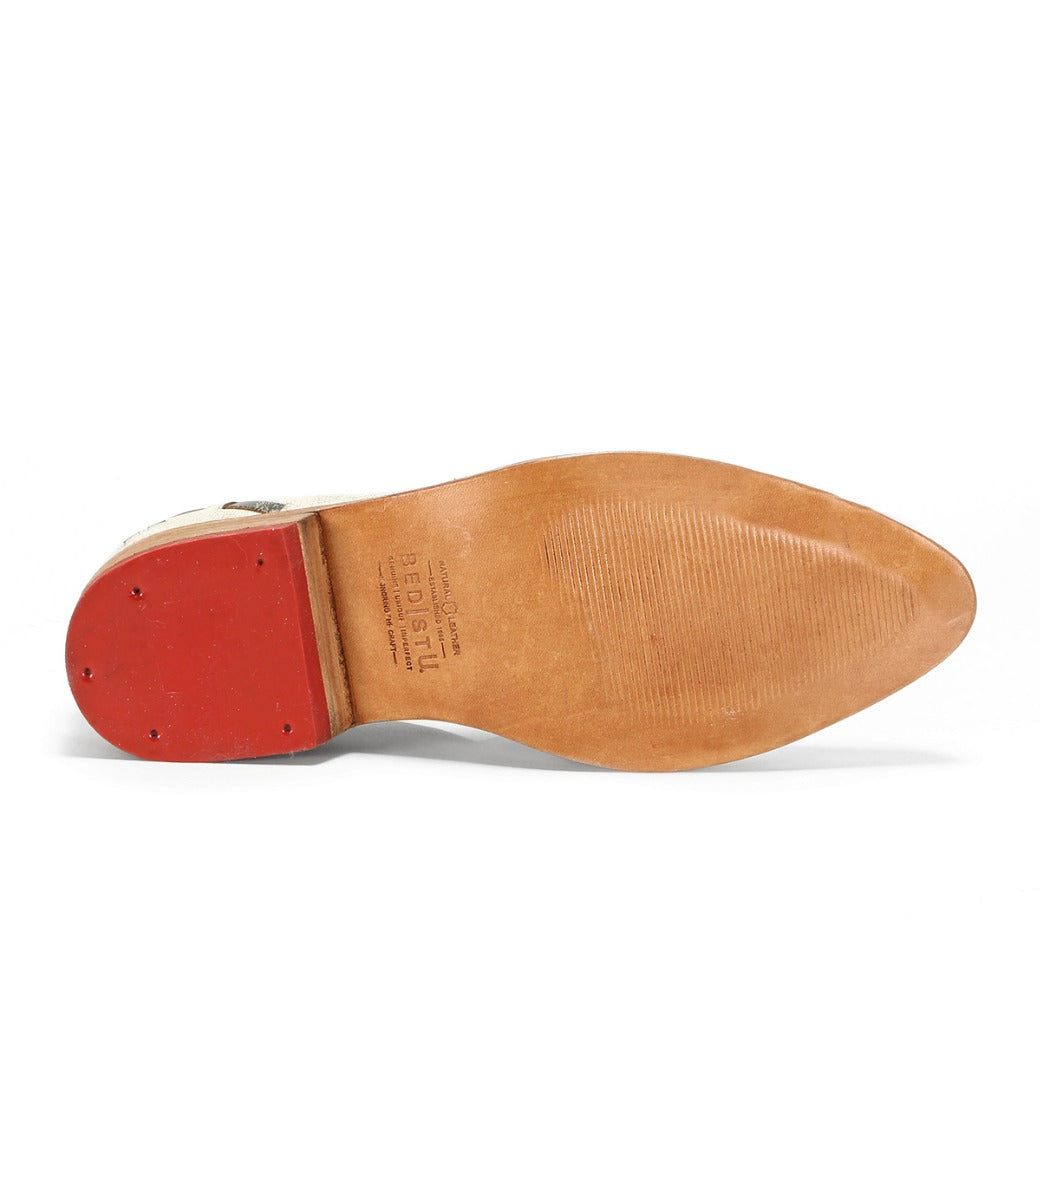 A Neftis shoe with a red sole on a white background by Bed Stu.